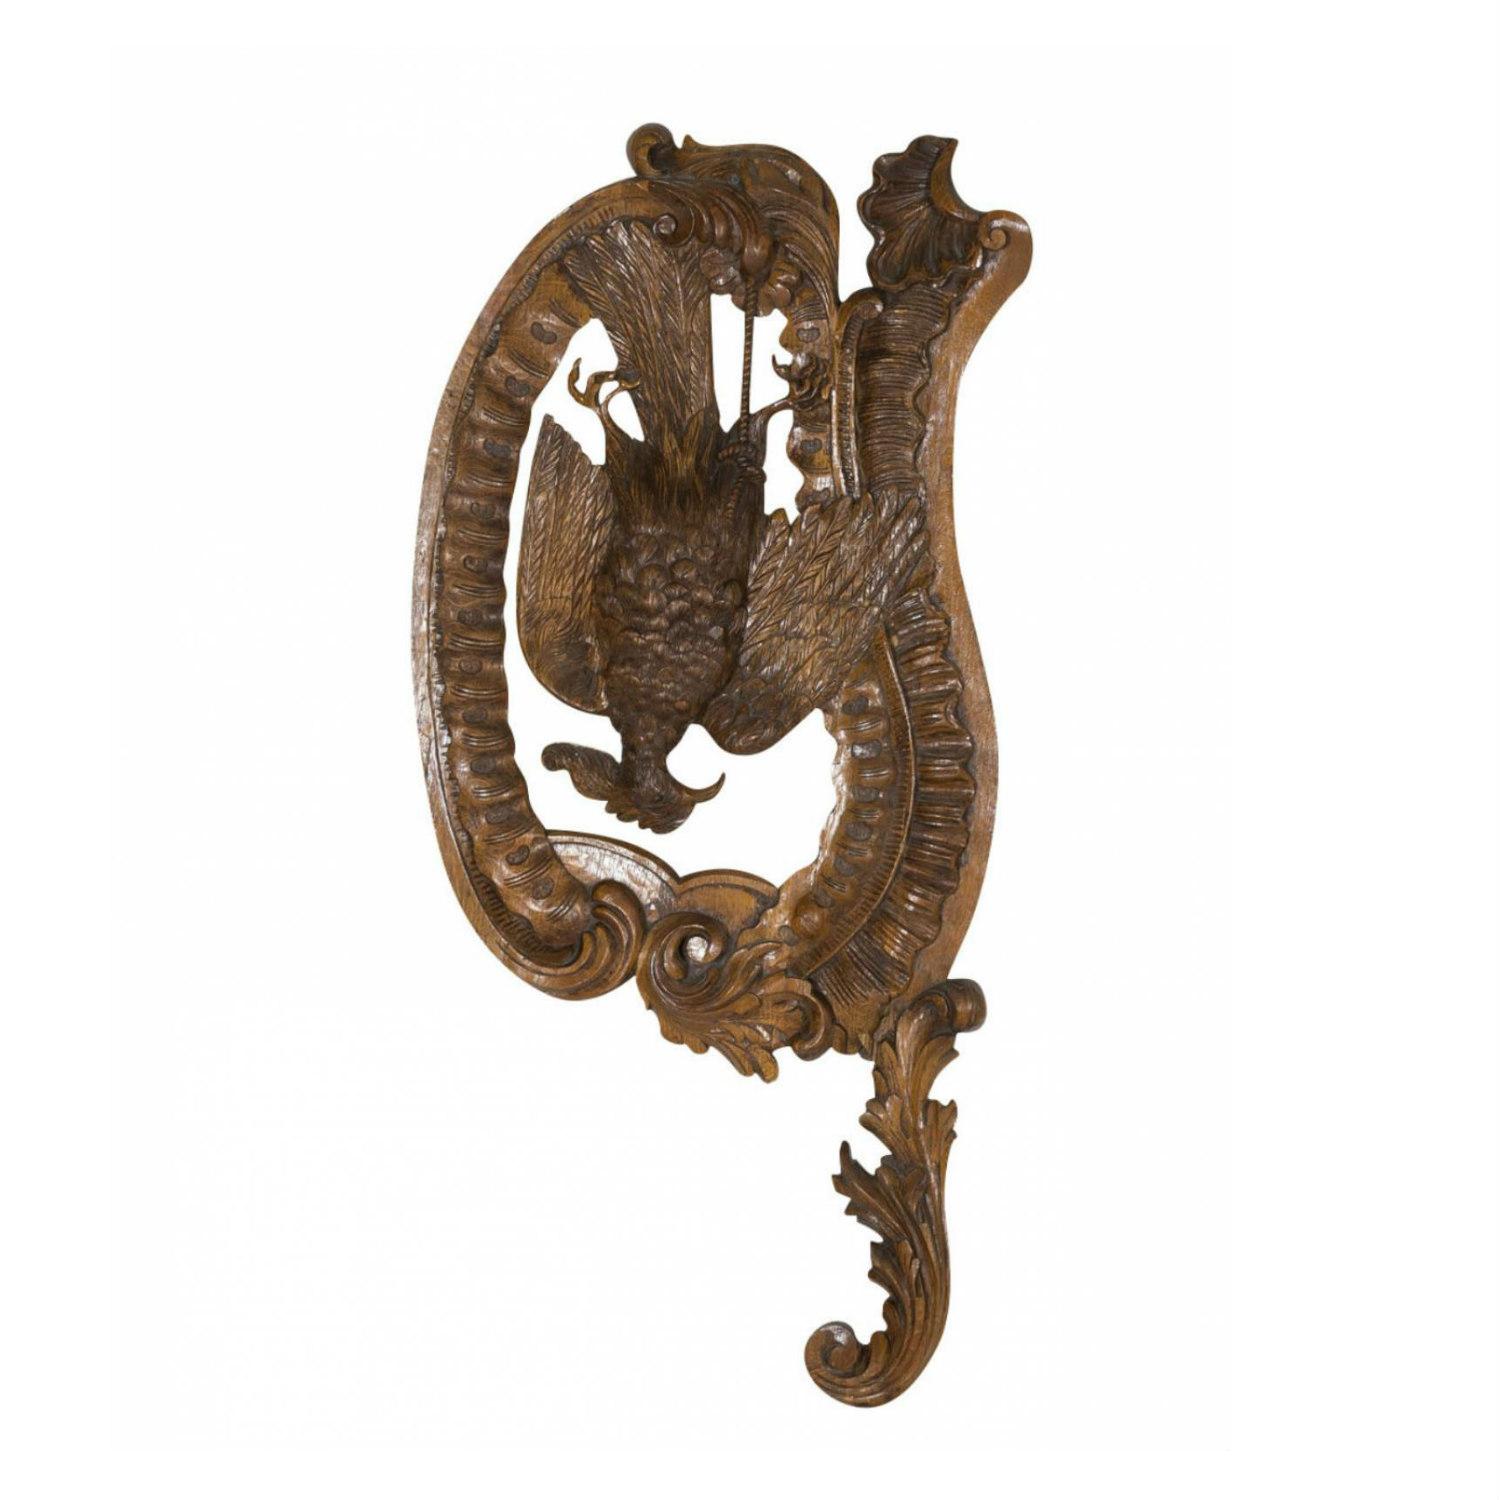 A fine pair of 19th century French oak hunting trophy plaques depicting intricately carved hanging dead game birds, a pheasant on the left and a bécasse or woodcock on the right, circa 1880s. These large fruits of the hunt plaques are each carved